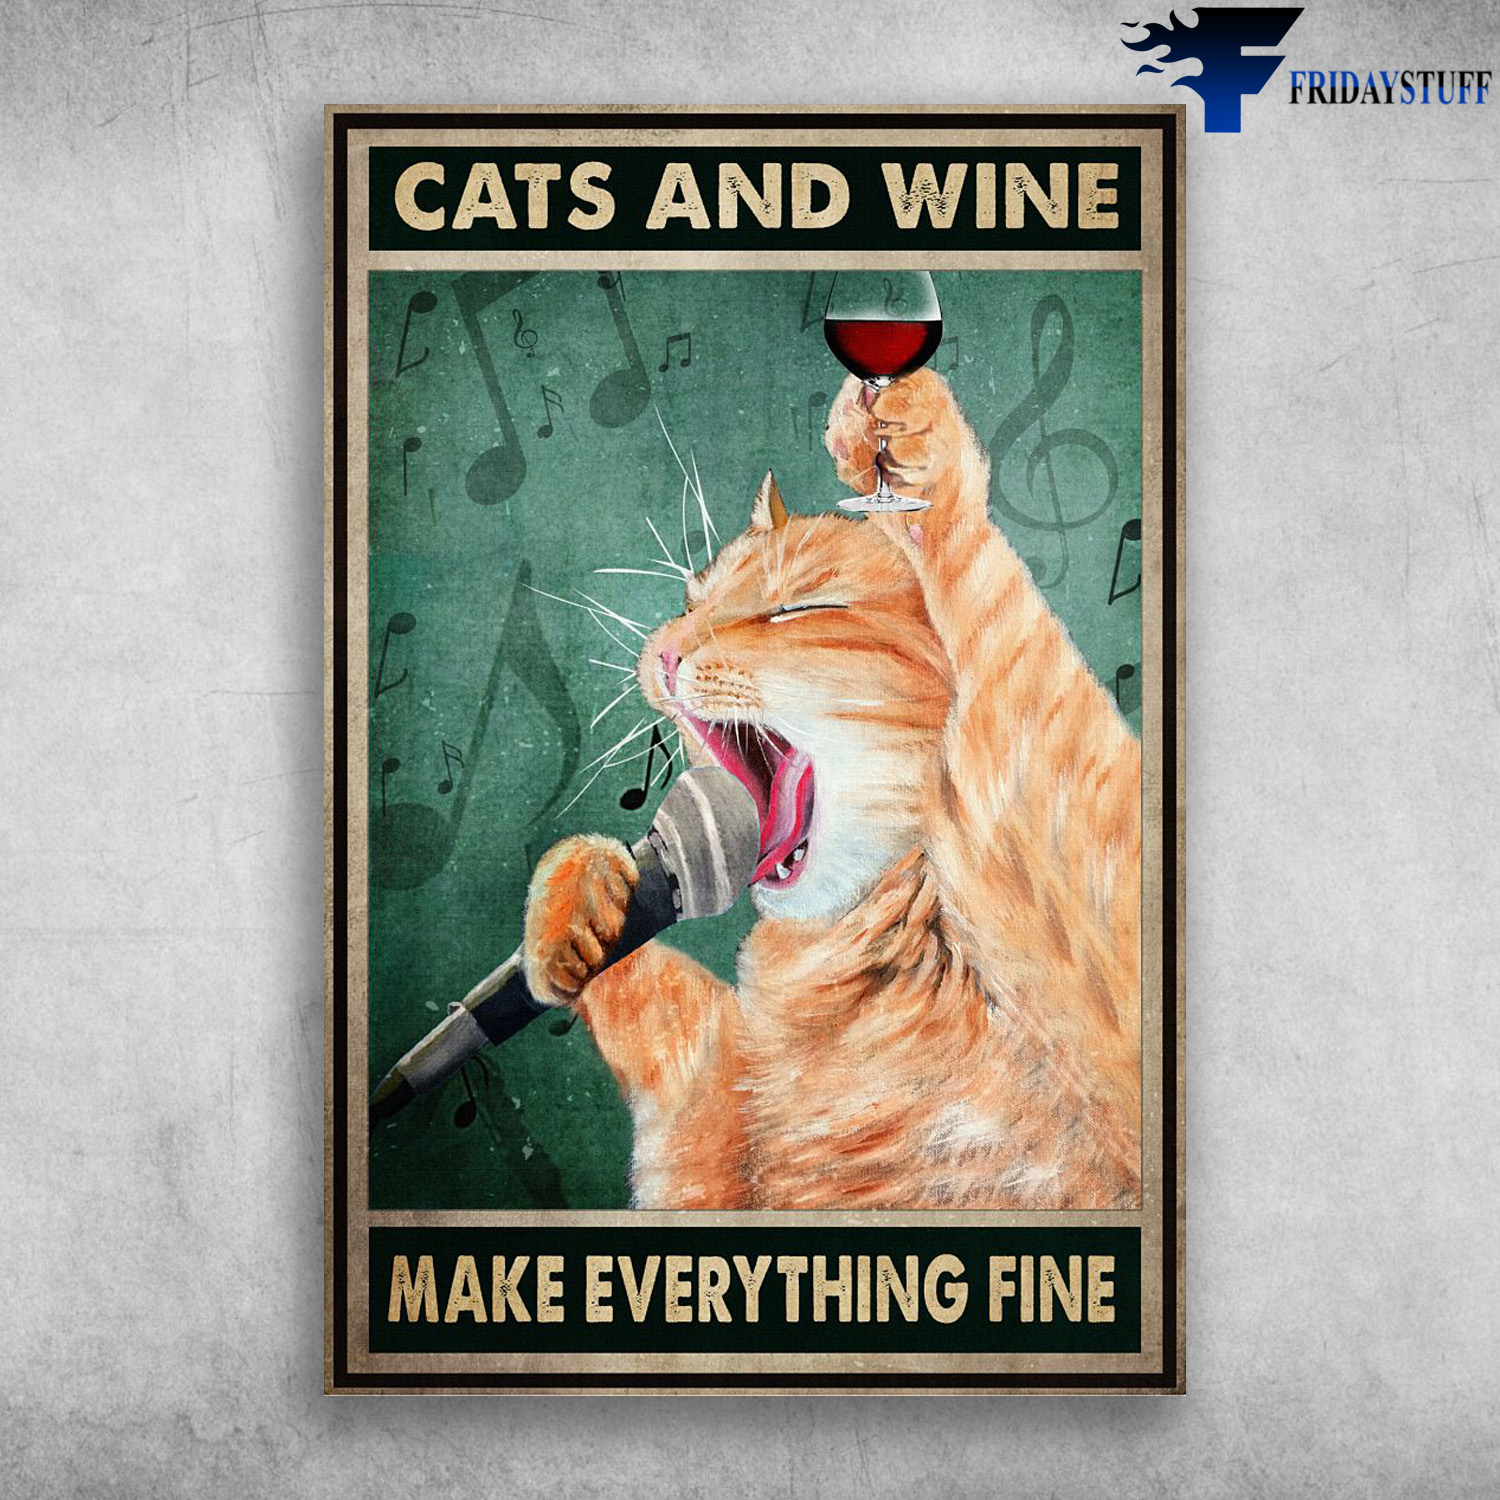 Cat Singing And Wine - Cats And Wine Make Everything Fine